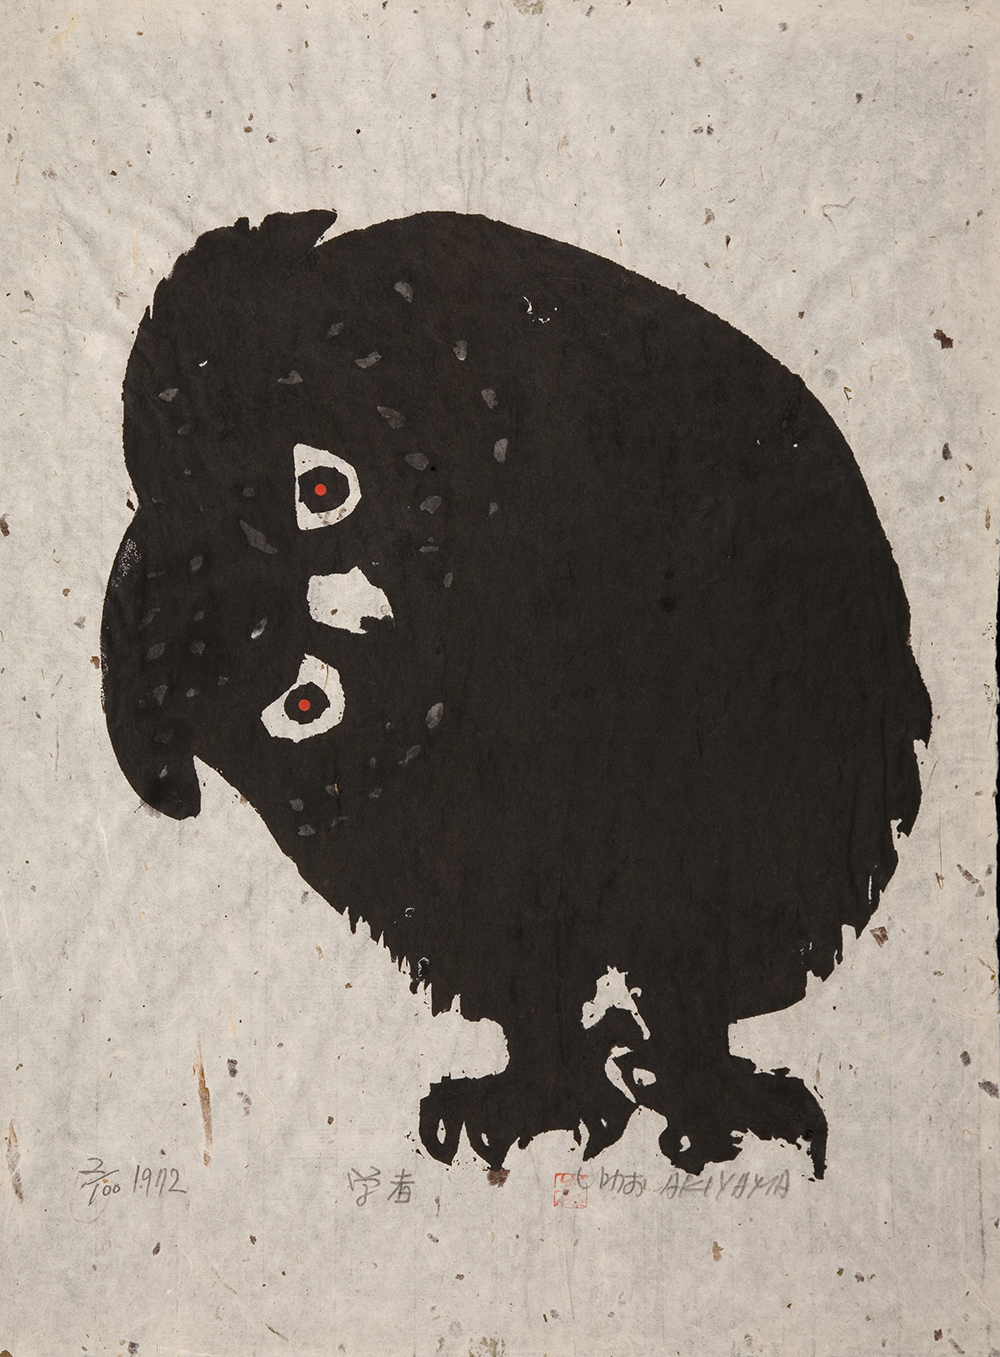 The shape of an owl is printed in black ink. The figure dominates the whole page of paper. The owl stands with its head cocked to his right side looking out. The figure is all black except for its eyes and beak. The eyes have black pupils with red irises. There are faint dots of gray around the neck and head indicating feathers. 